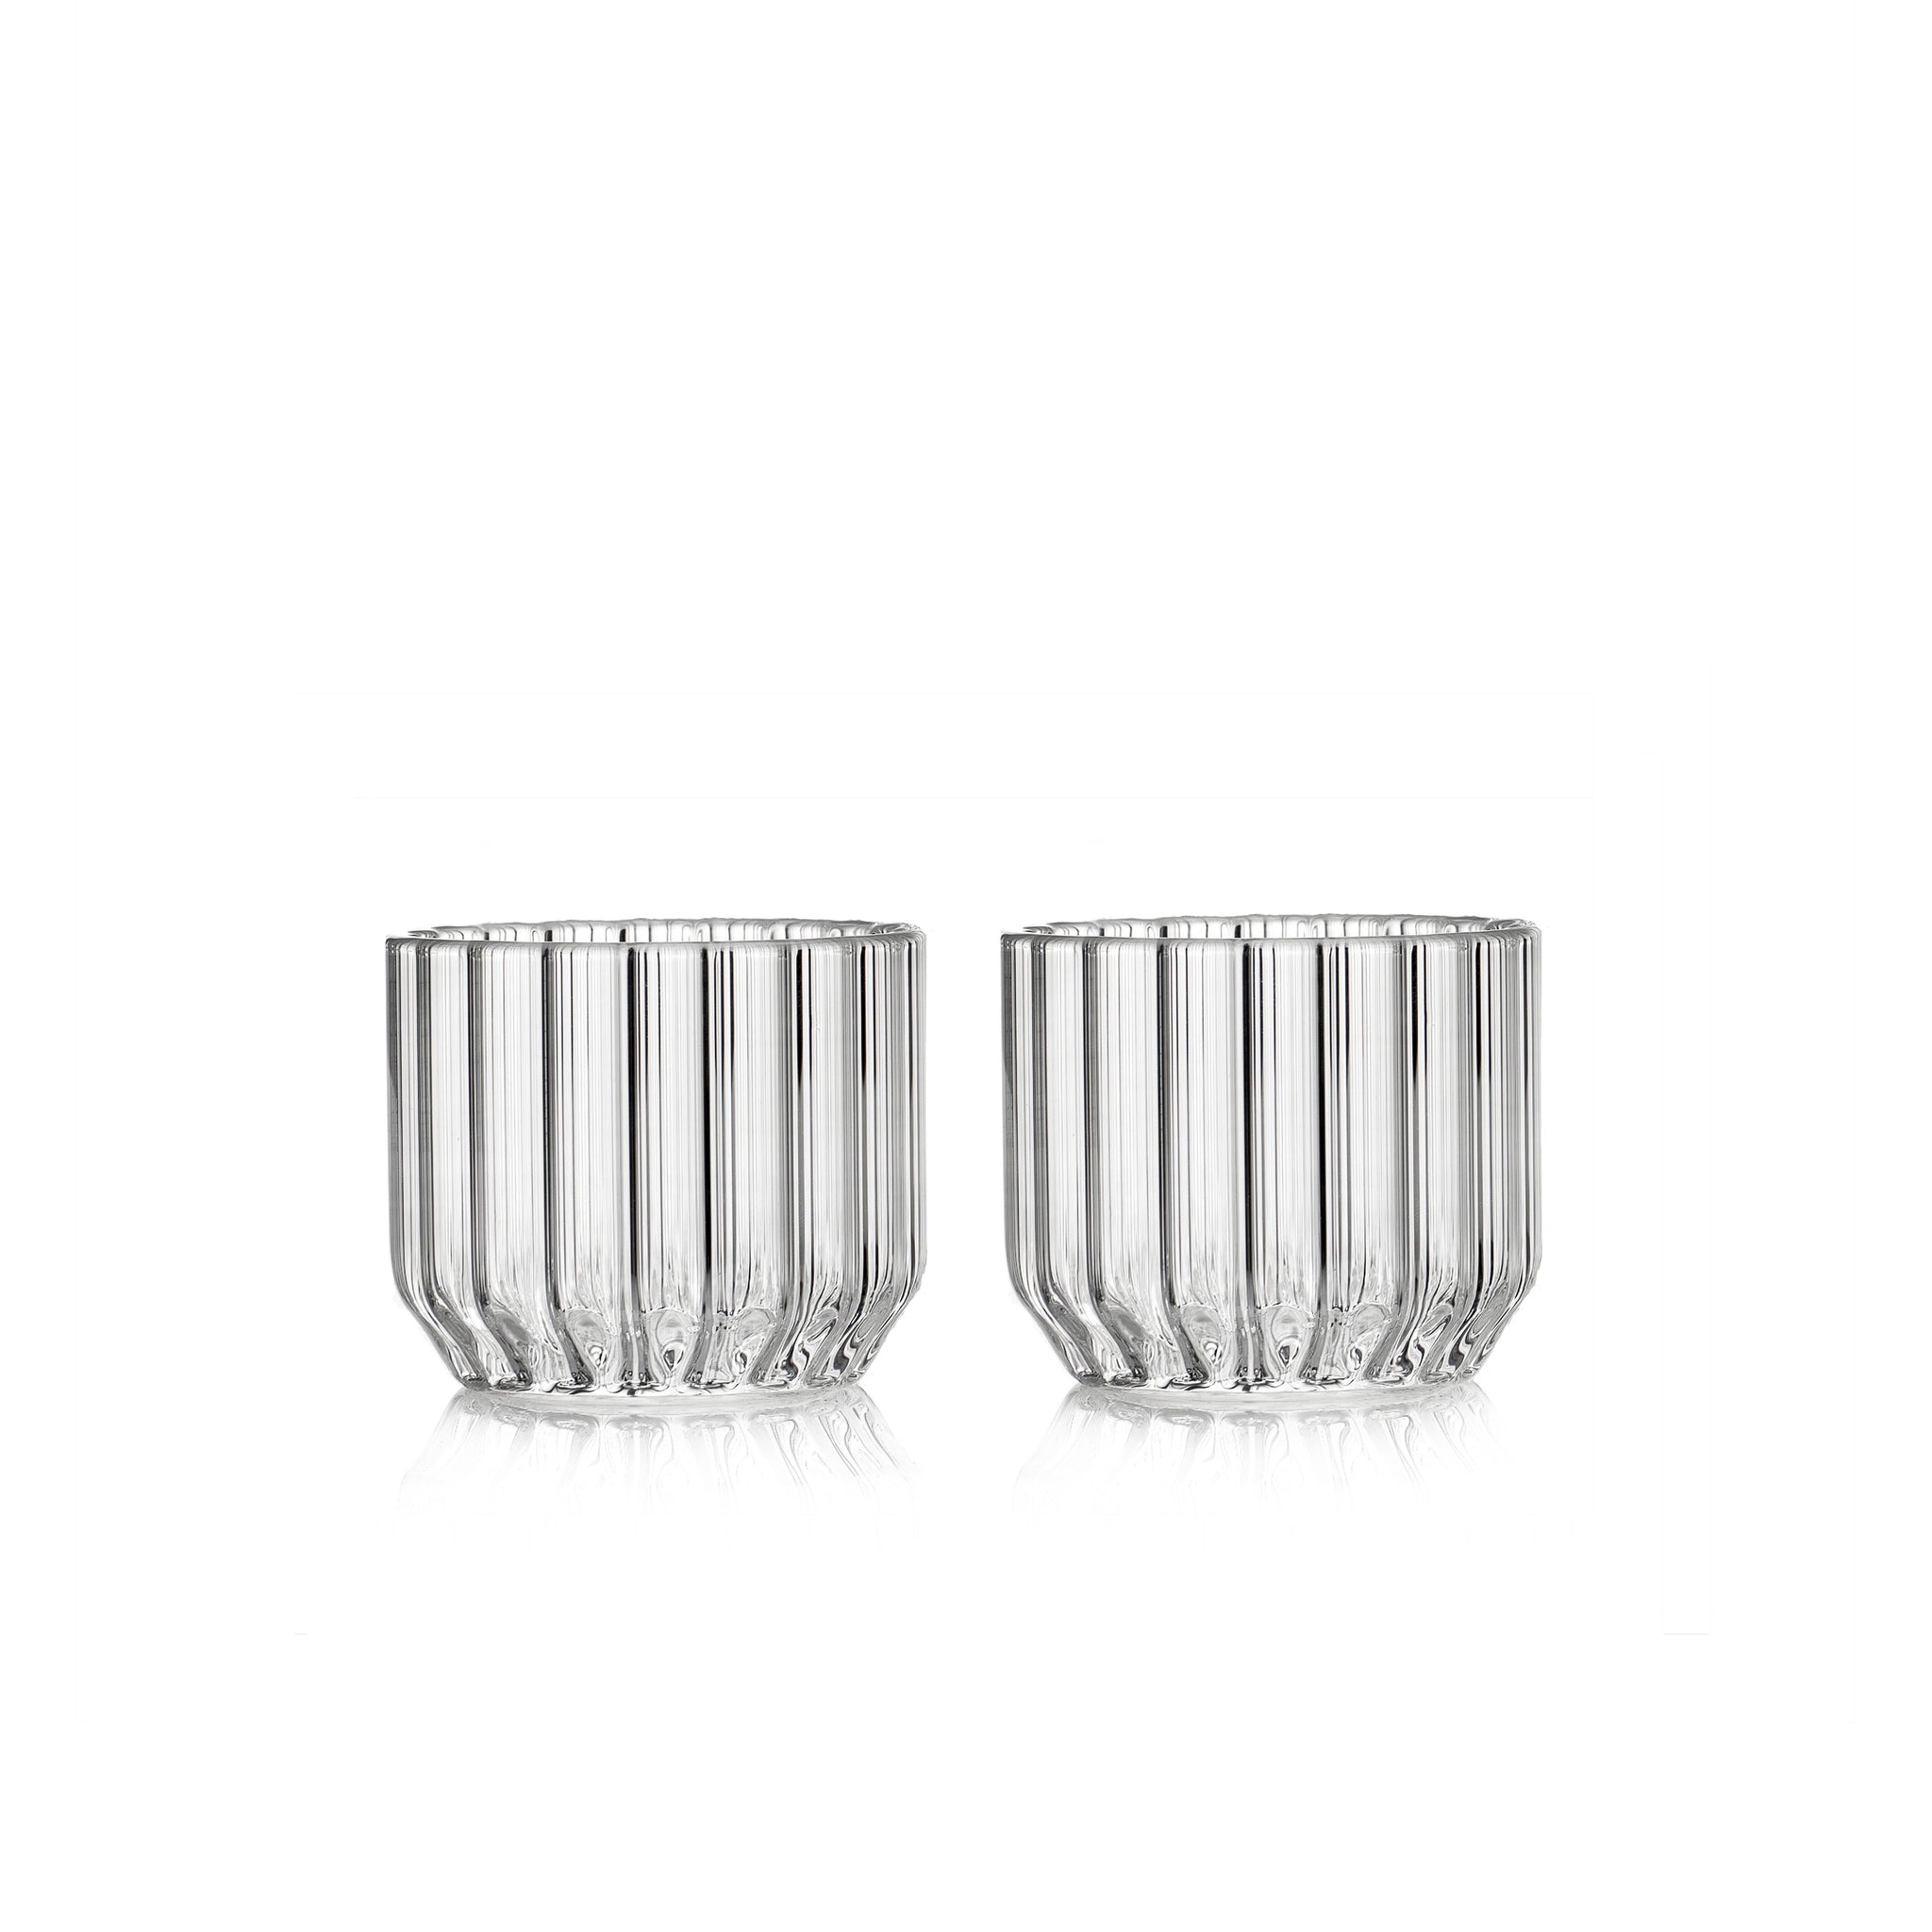 Pair of Handcrafted Contemporary Czech Stemless Wine Glasses